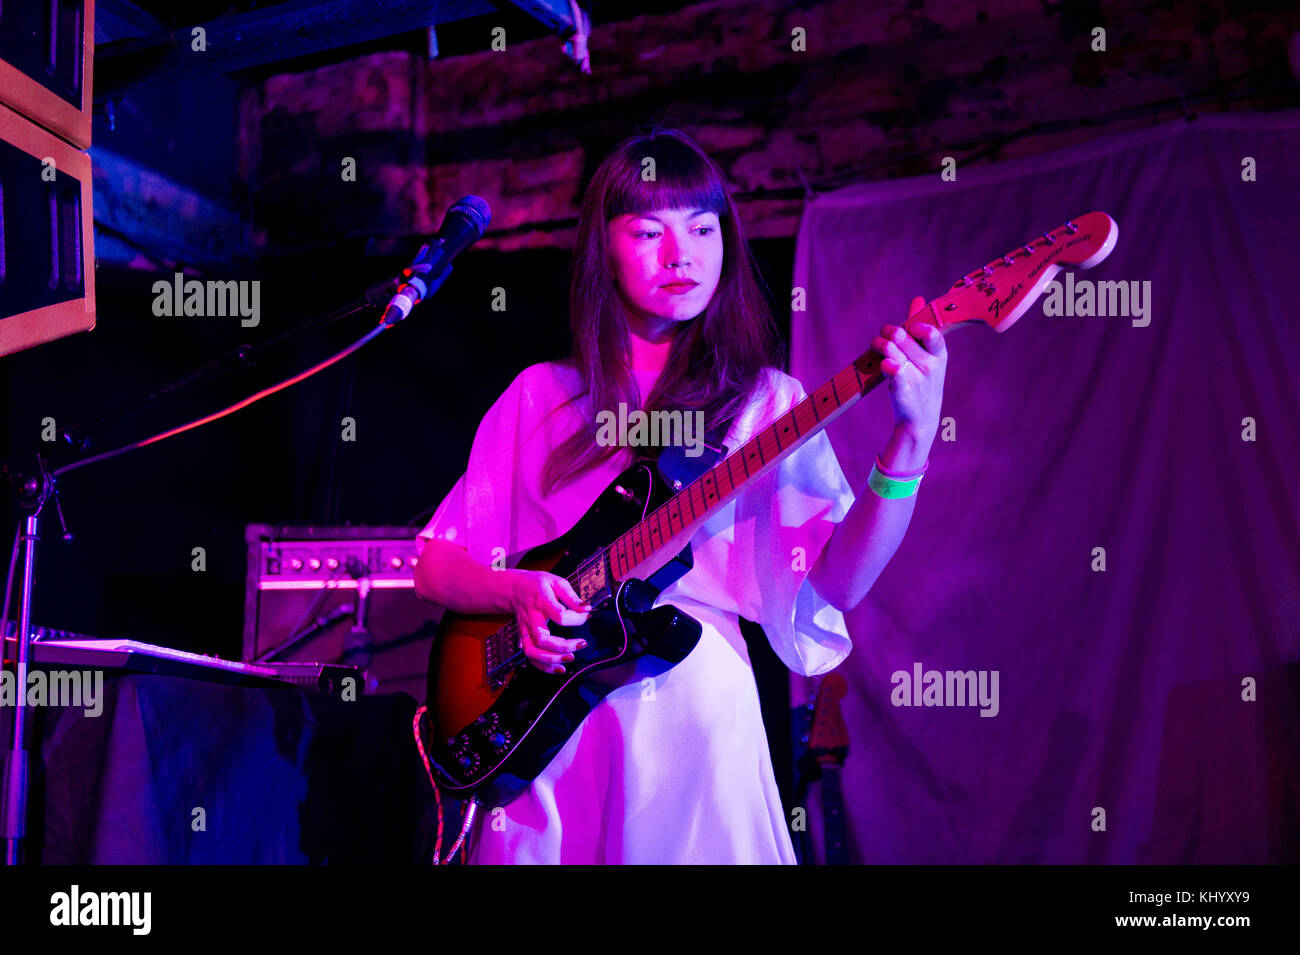 Manchester, UK. 21st November, 2017. Brighton-based musician Helen Ganya Brown, who performs as Dog in the Snow, in concert (supporting Simon Raymonde's new band Lost Horizons) at Soup Kitchen, Manchester 21st November. Credit: John Bentley/Alamy Live News Stock Photo